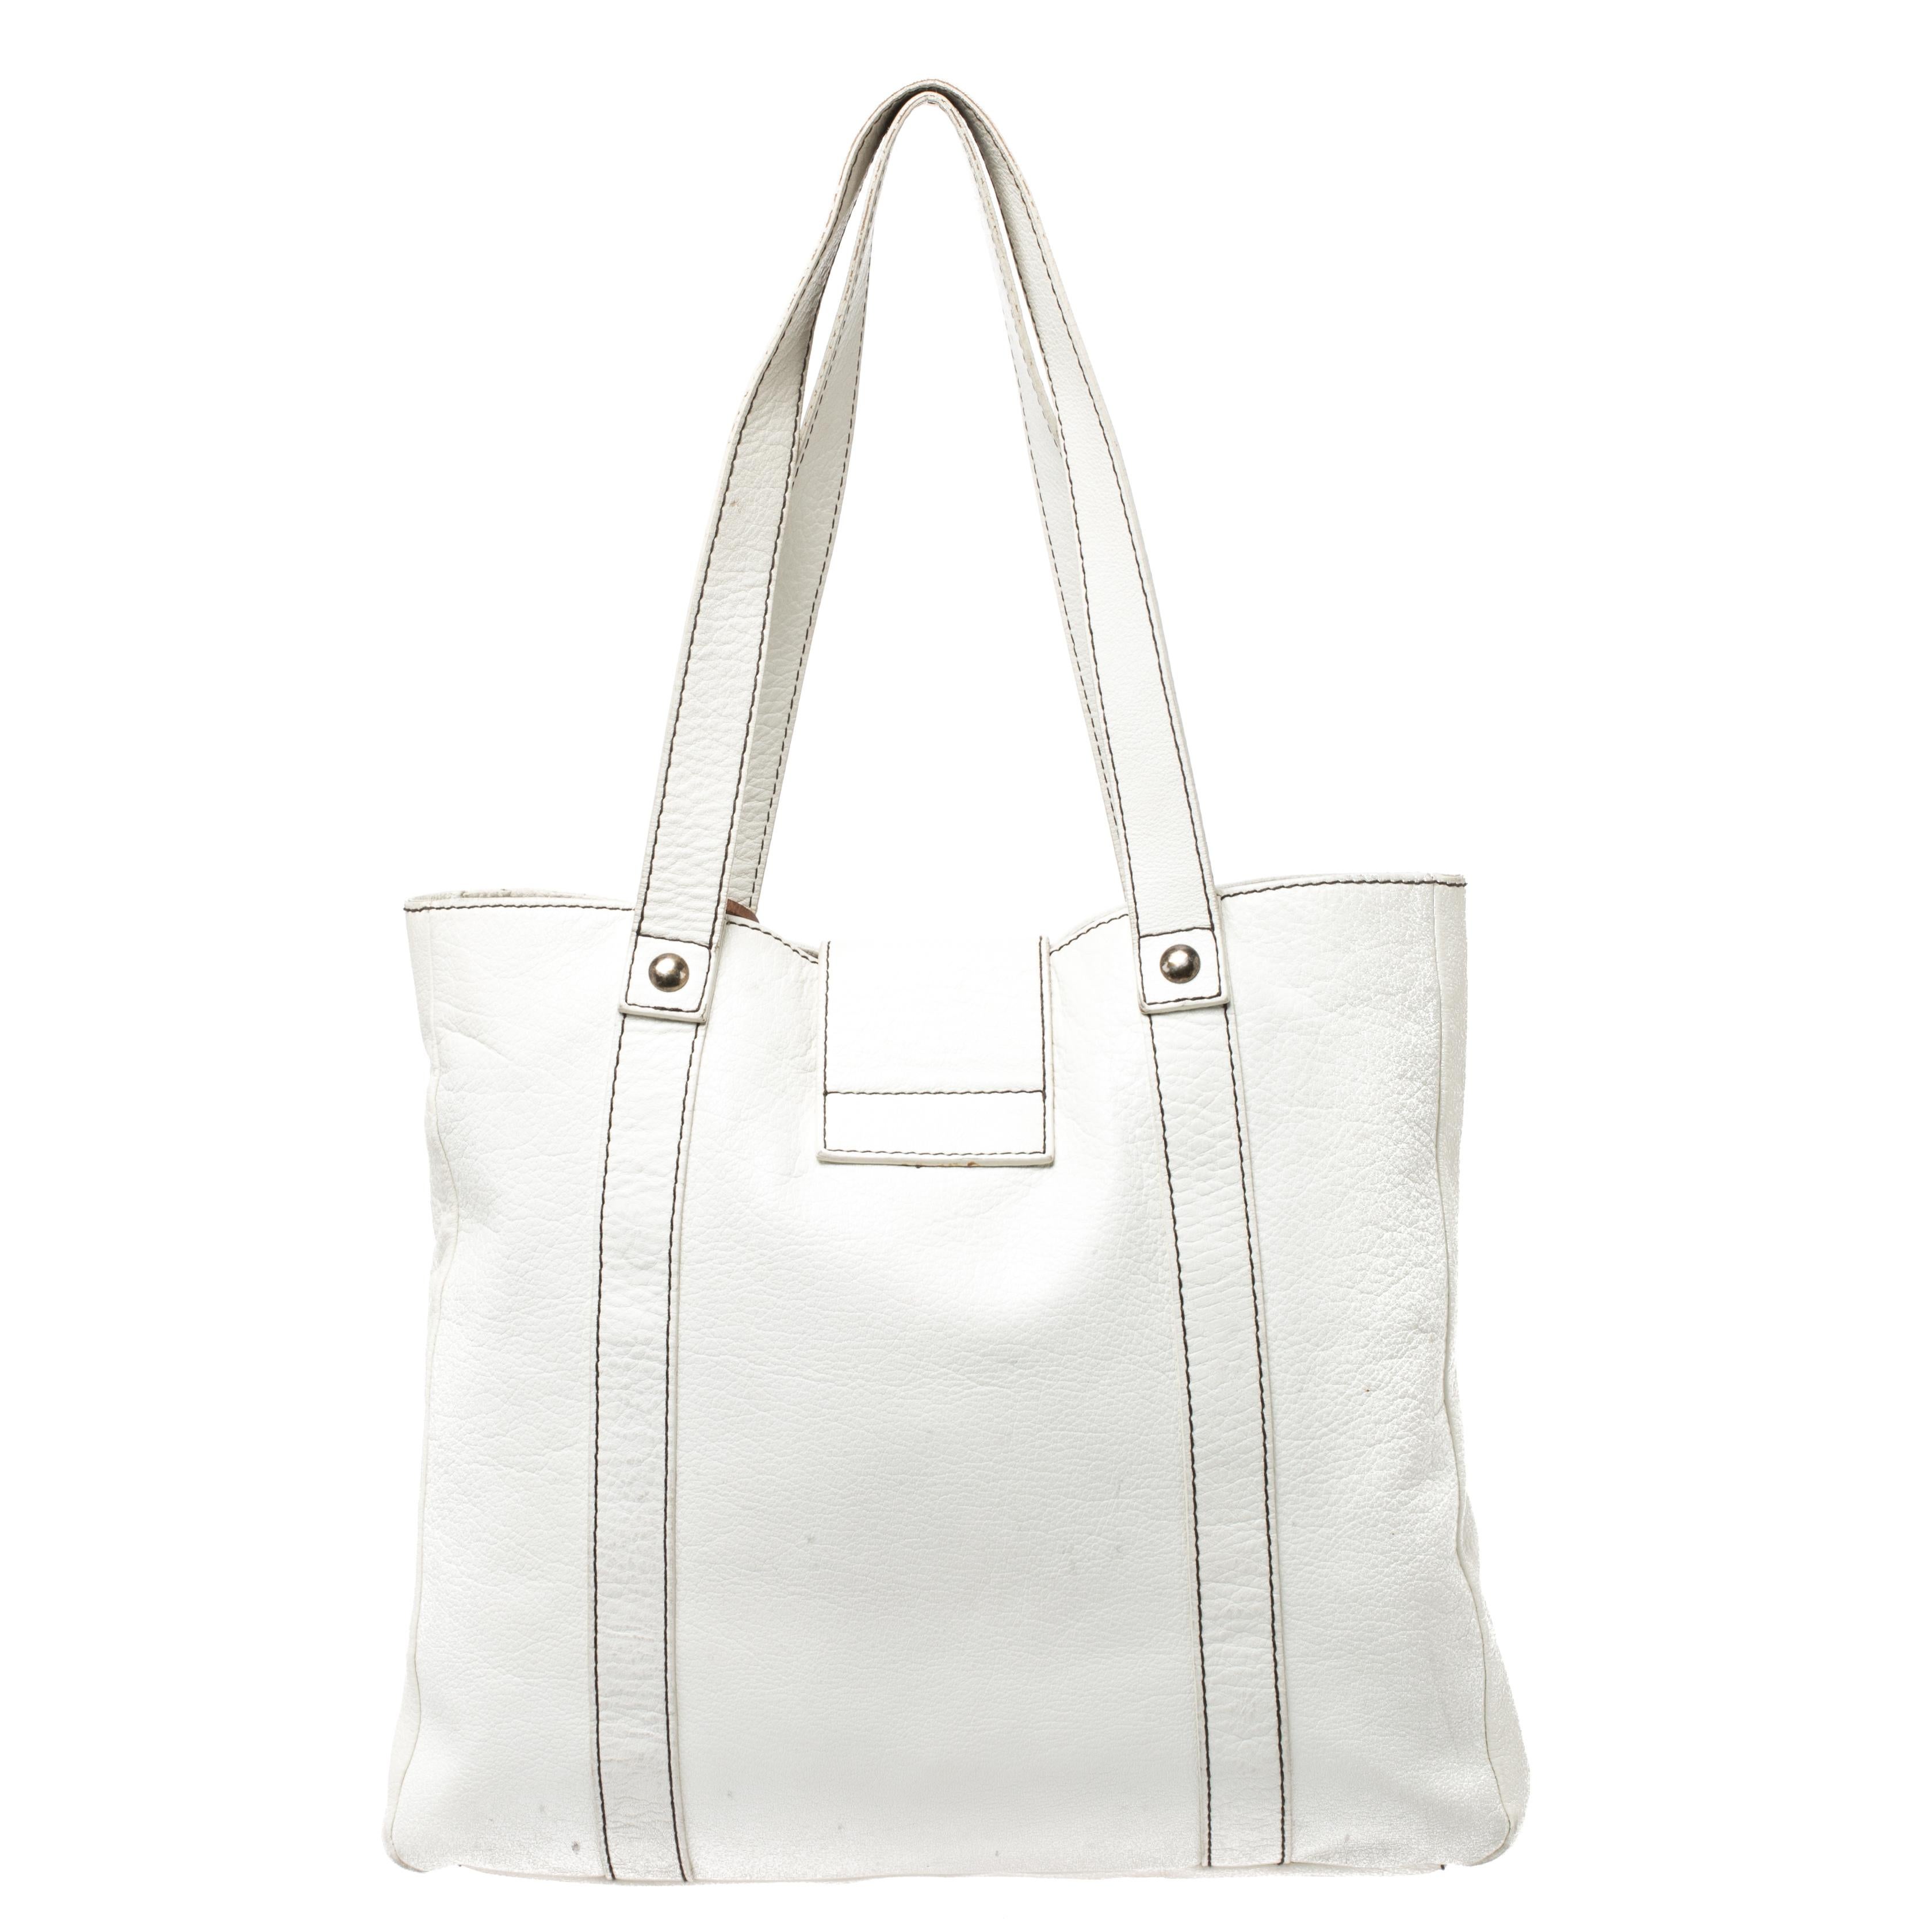 This Dolce & Gabbana tote is the perfect bag to add to your collection. Featuring a white leather body, this bag is secured with an exaggerated buckle at the front. It comes with dual top handles, dangling charms and offers ample room to stow all